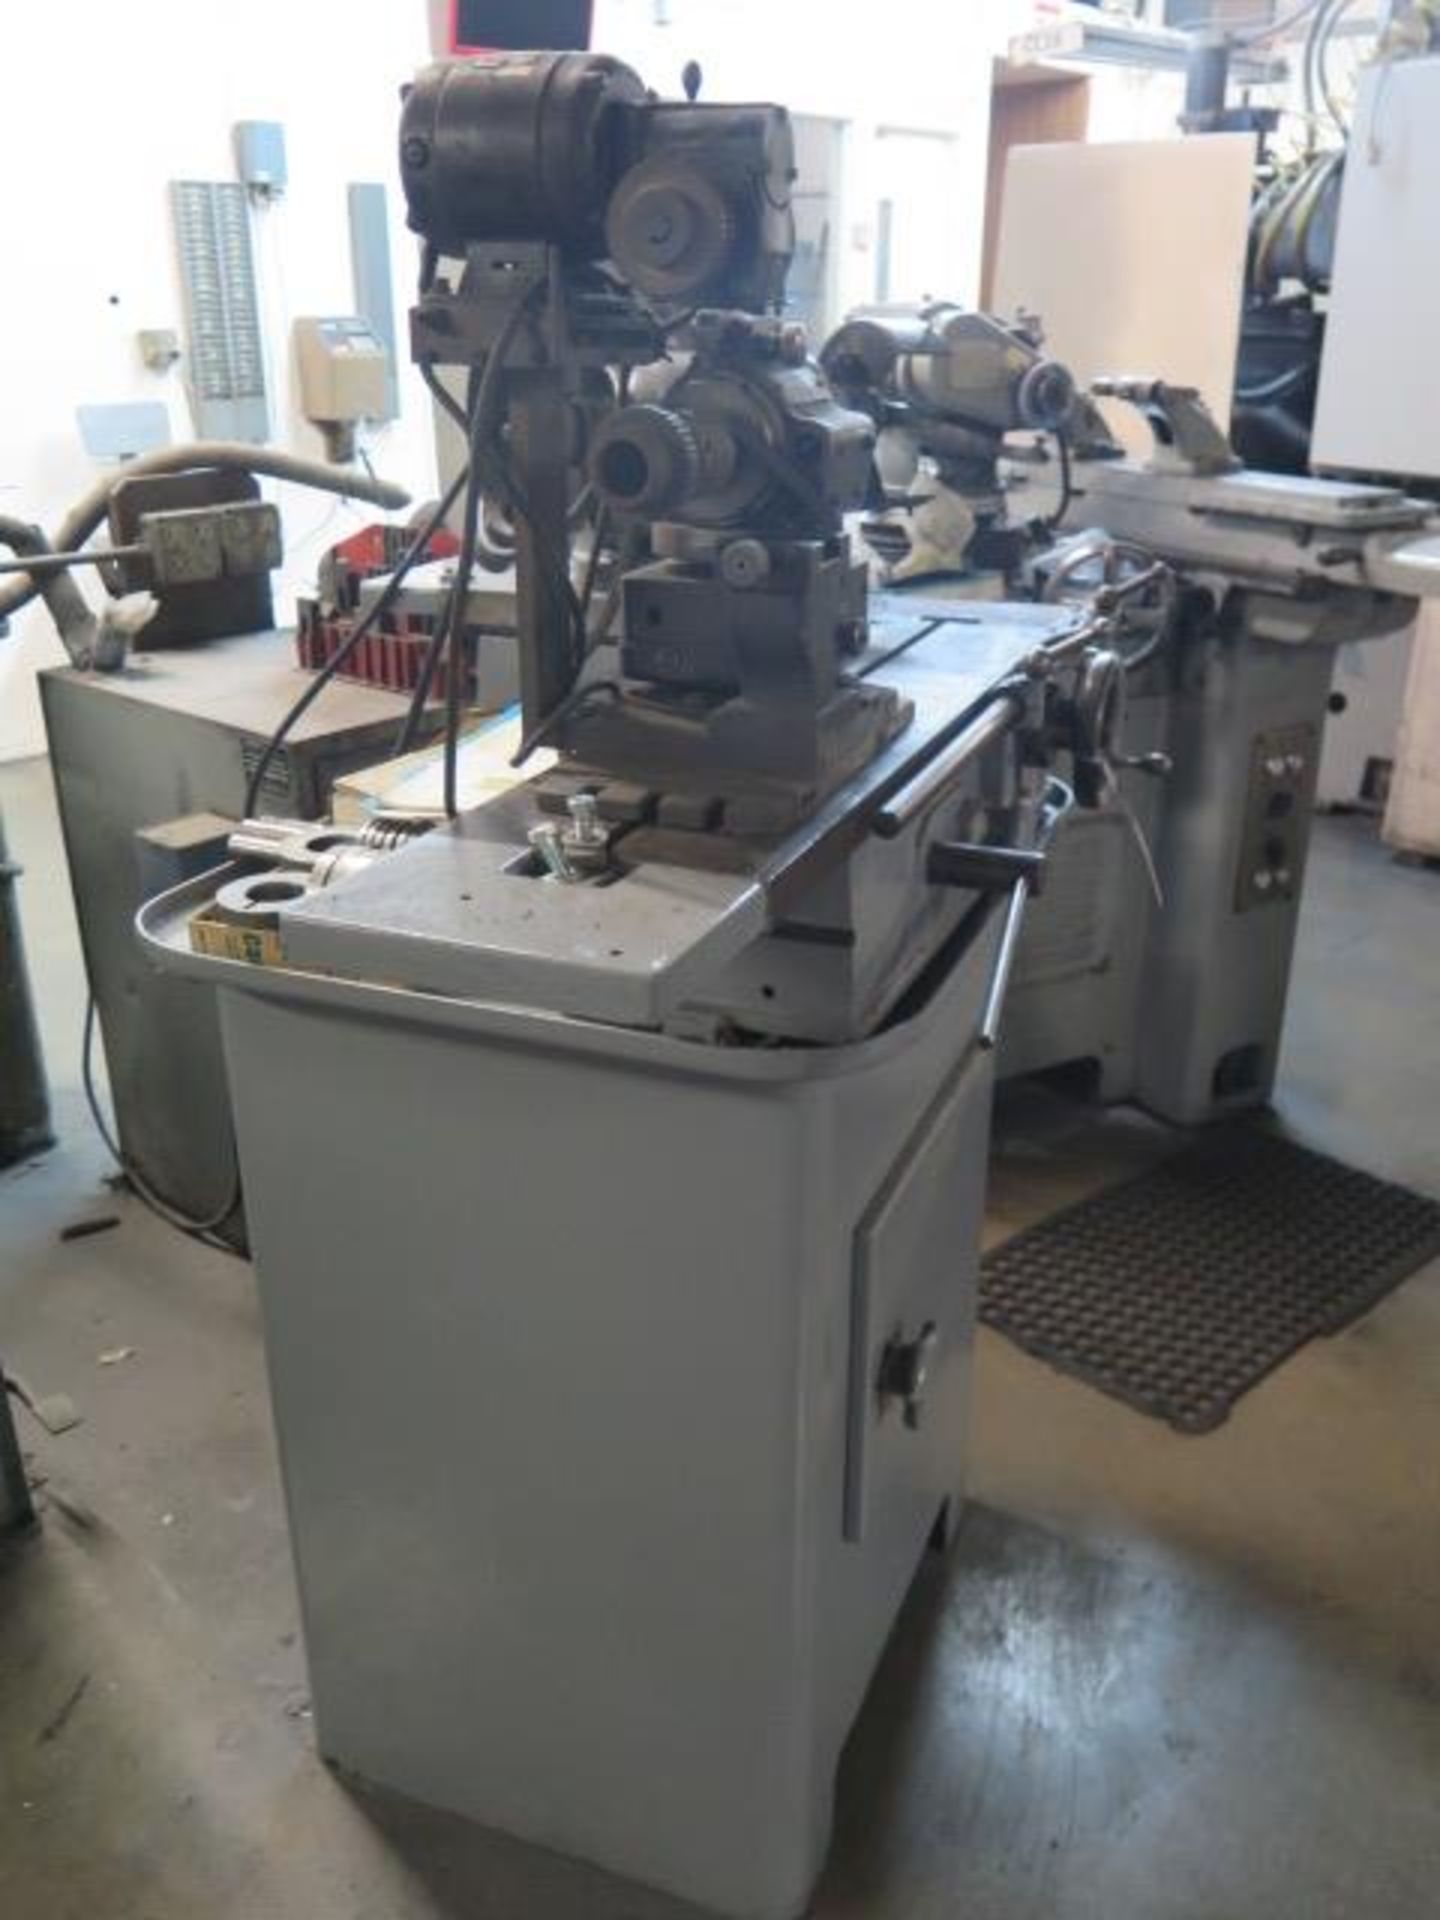 Royal Oaks RO-Grinder Tool and Cutter Grinder w/ Motorized 5C Work Head (SOLD AS-IS - NO WARRANTY) - Image 3 of 6